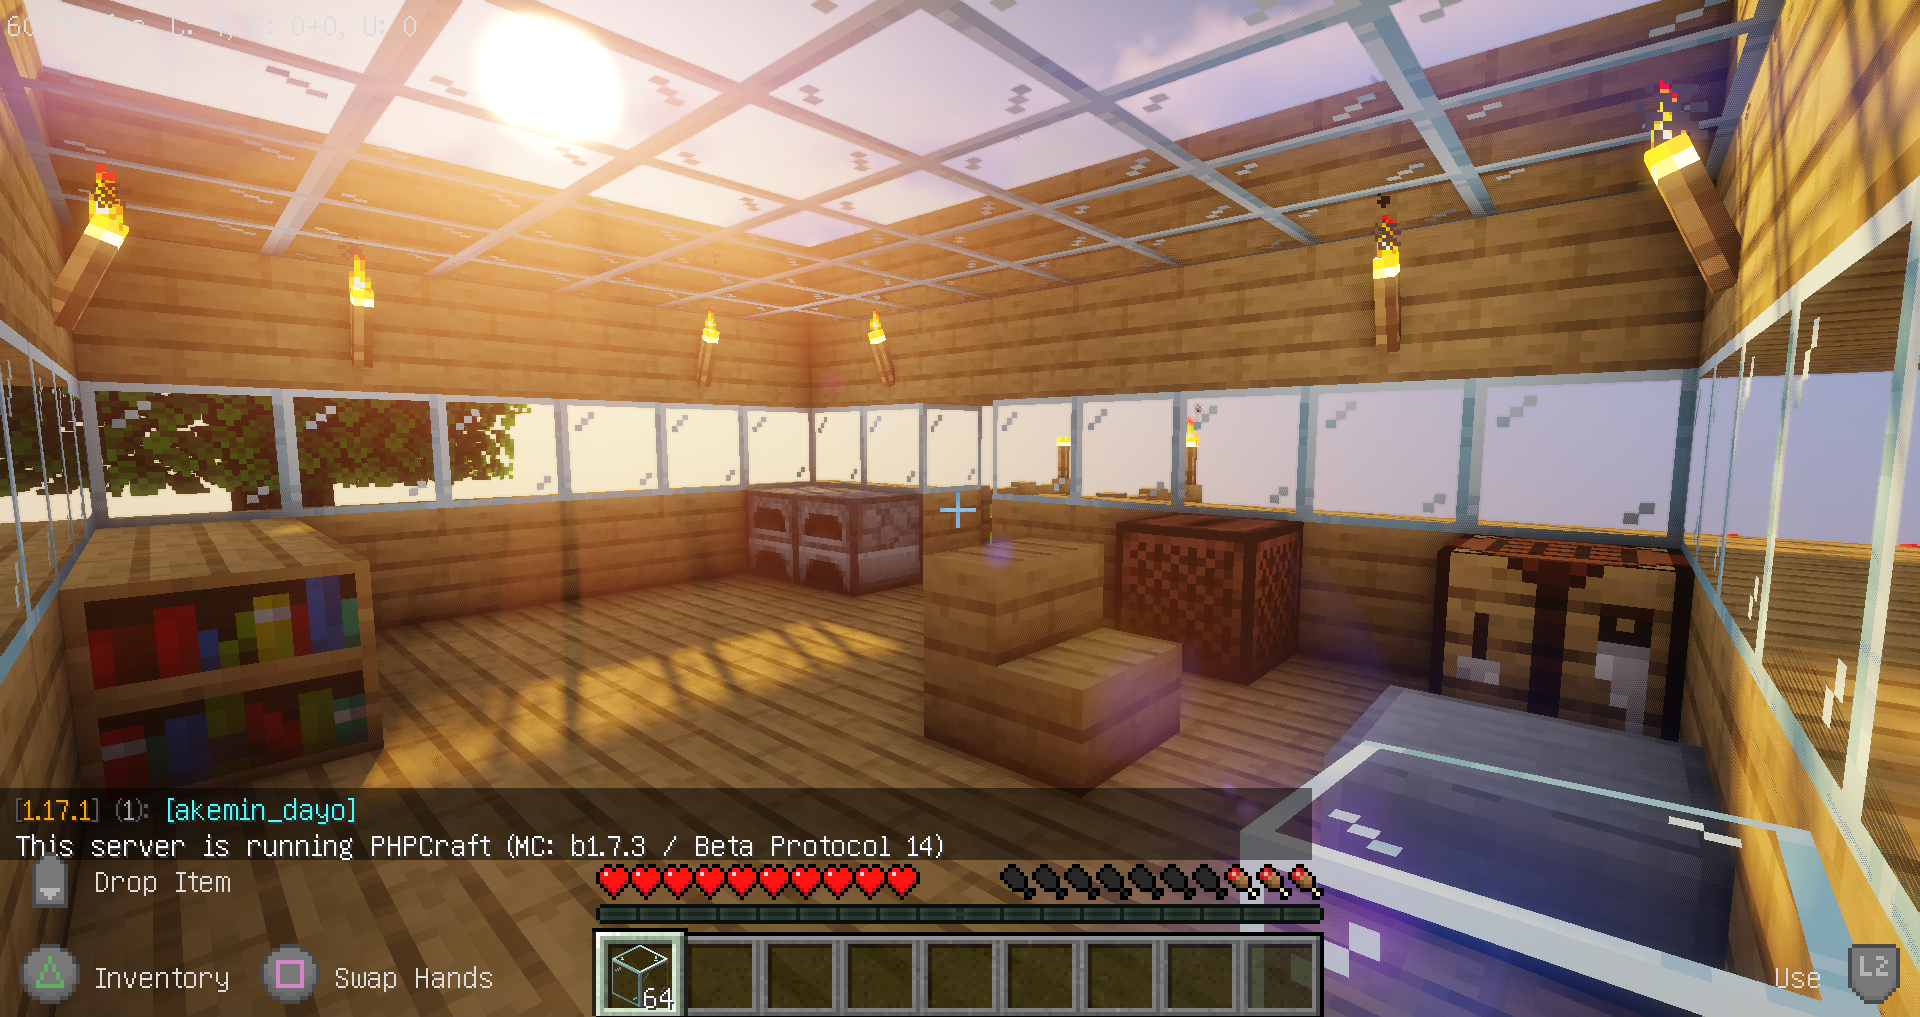 A screenshot of Minecraft 1.17.1 connected to a PHPCraft server, showing the interior of a small house that was built from wood planks. It is later in the day, and the sunlight is filtering through the glass roof. There are two furnaces, some bookshelves, a crafting table, a music player, a chair (actually an oak stair block), and a single stone slab intended to represent a desk.